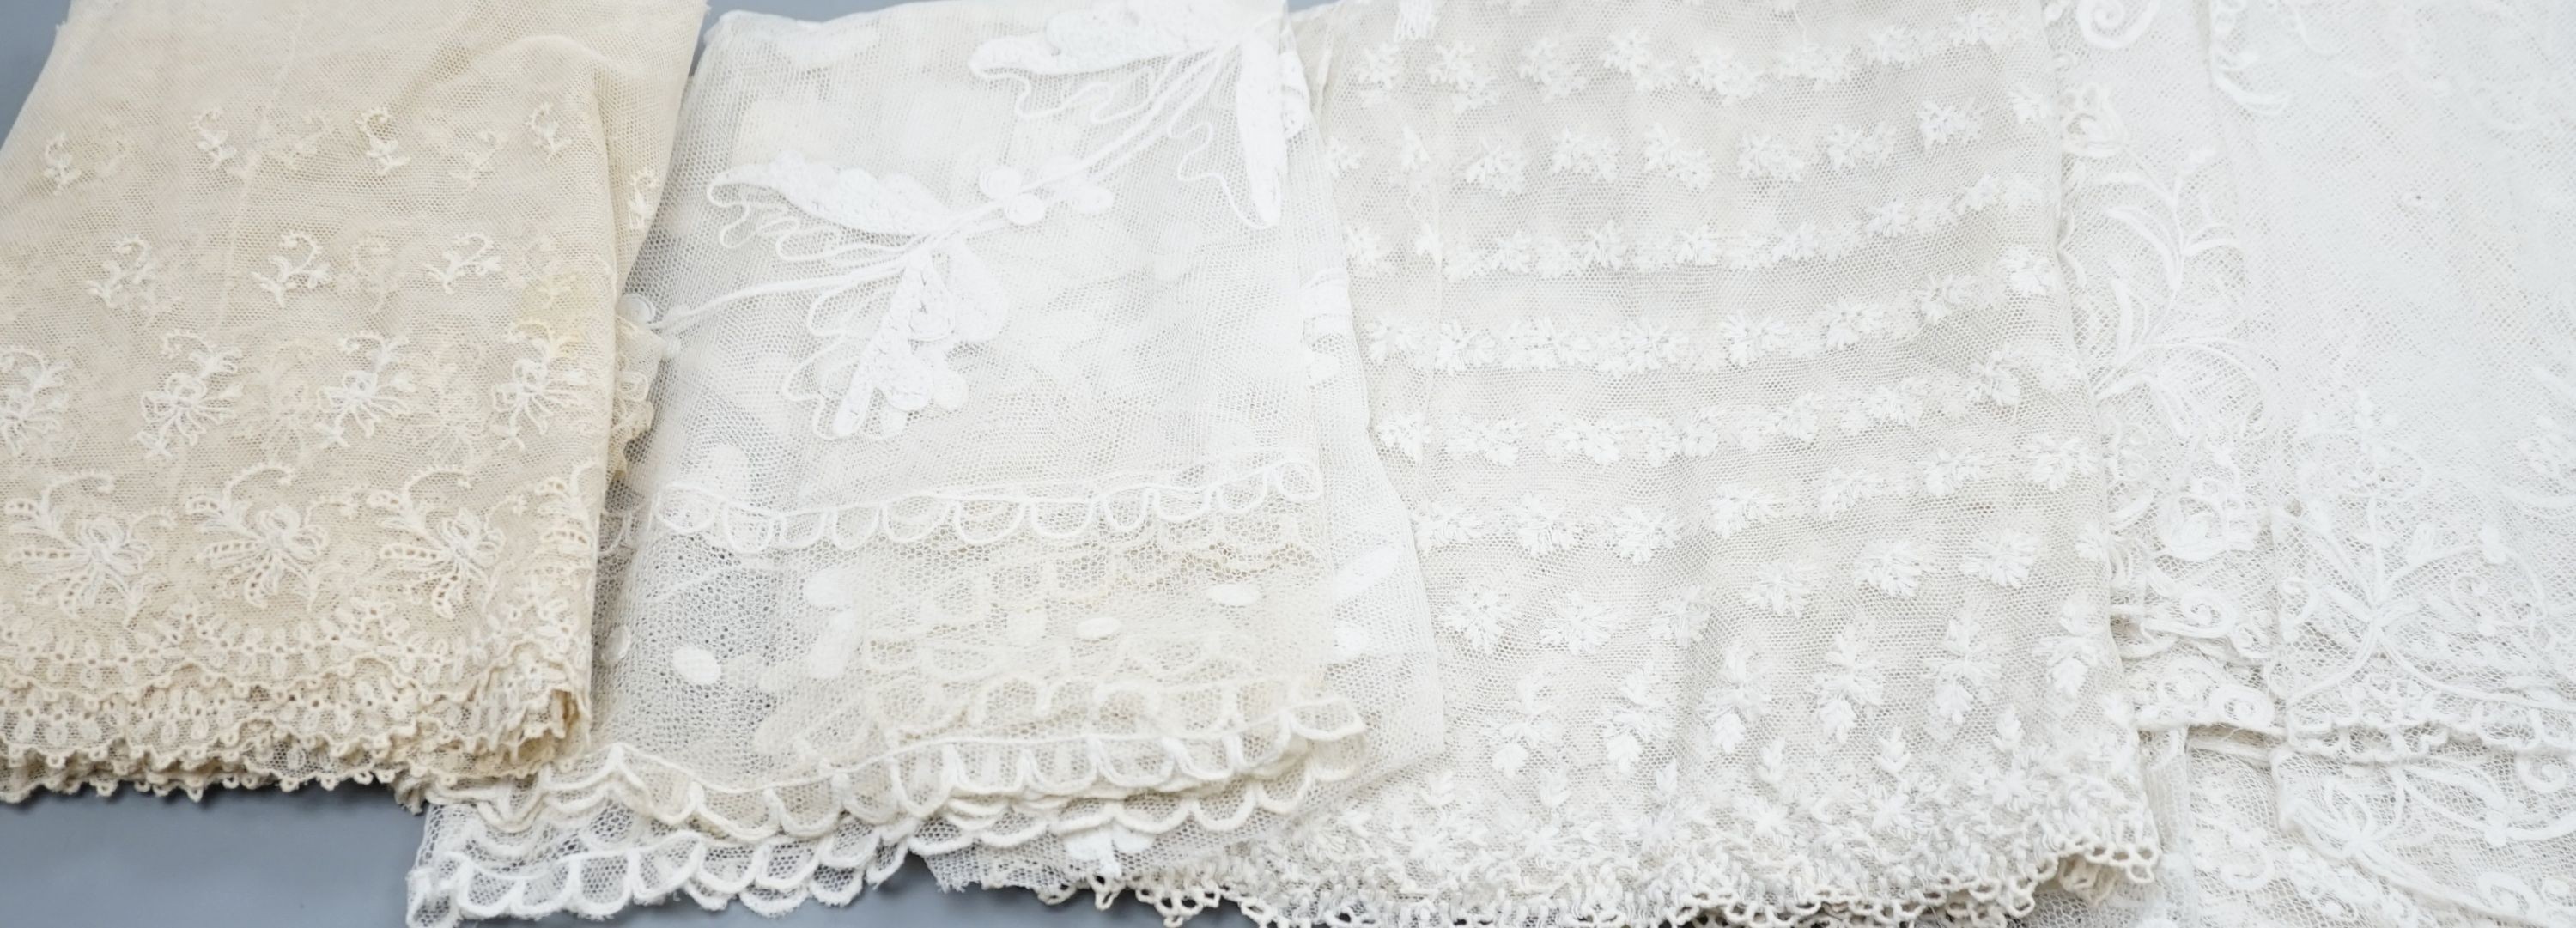 A needle lace skirt panel, a similar stole, various machine laces and trimmings